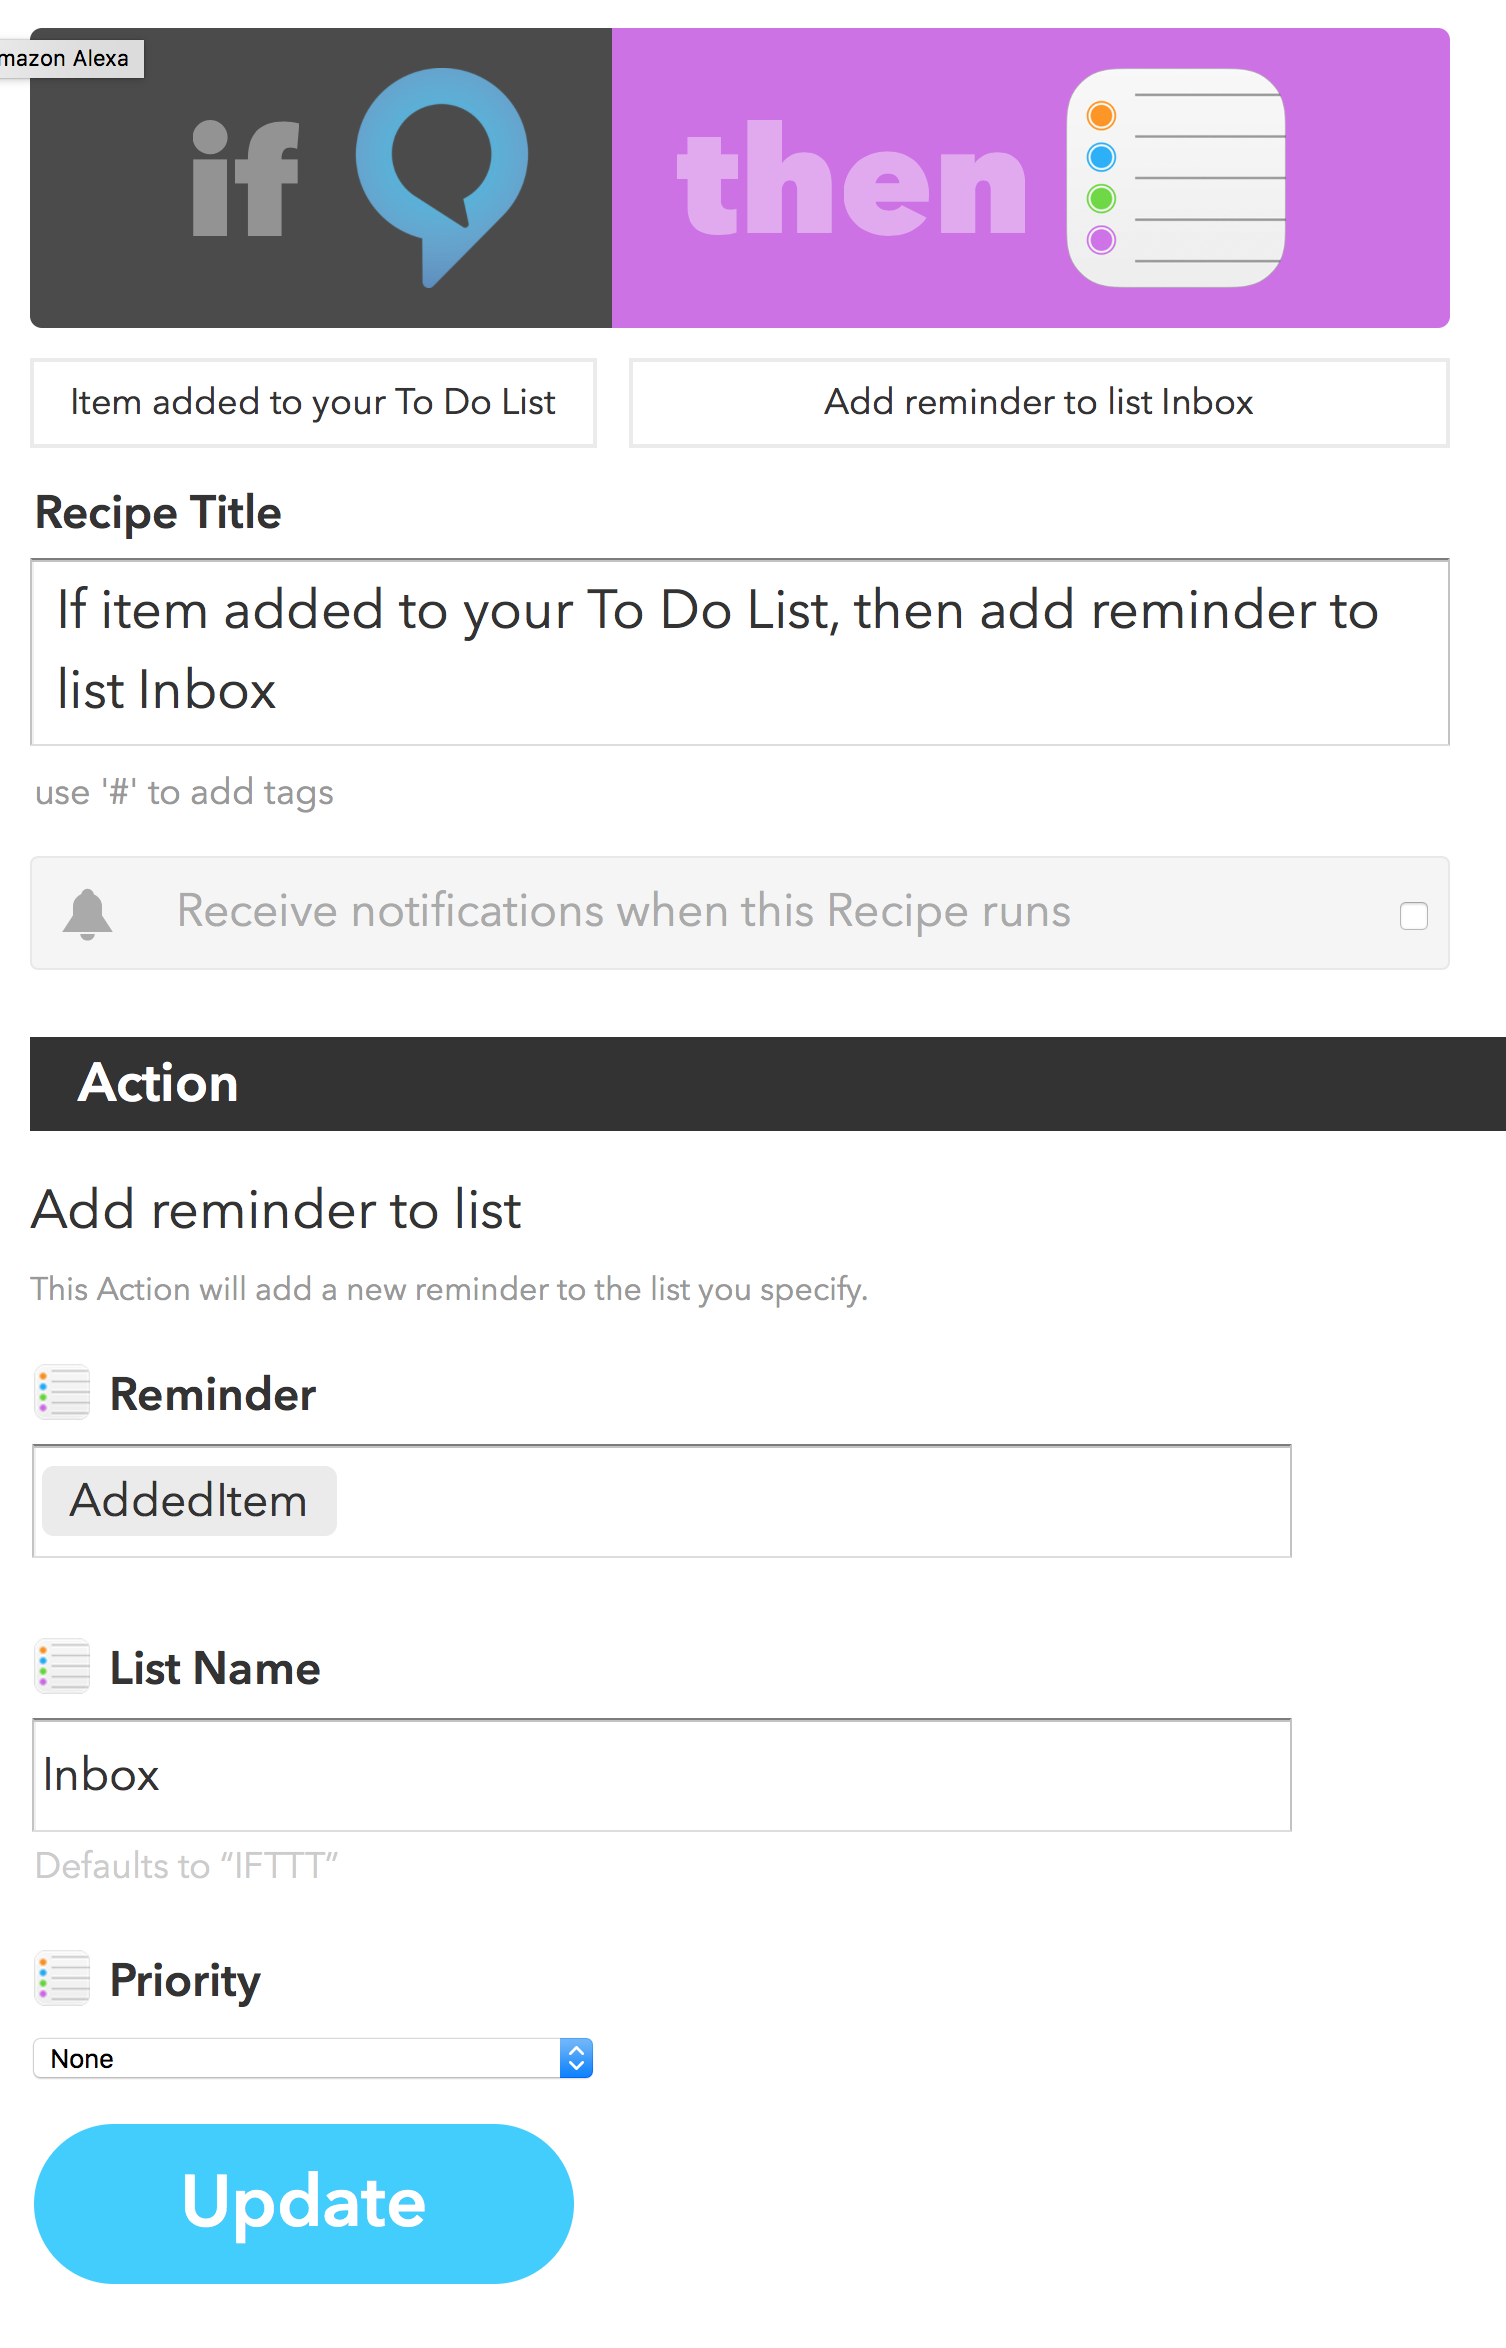 Moving Alexa To Dos to Apple Reminders via IFTTT